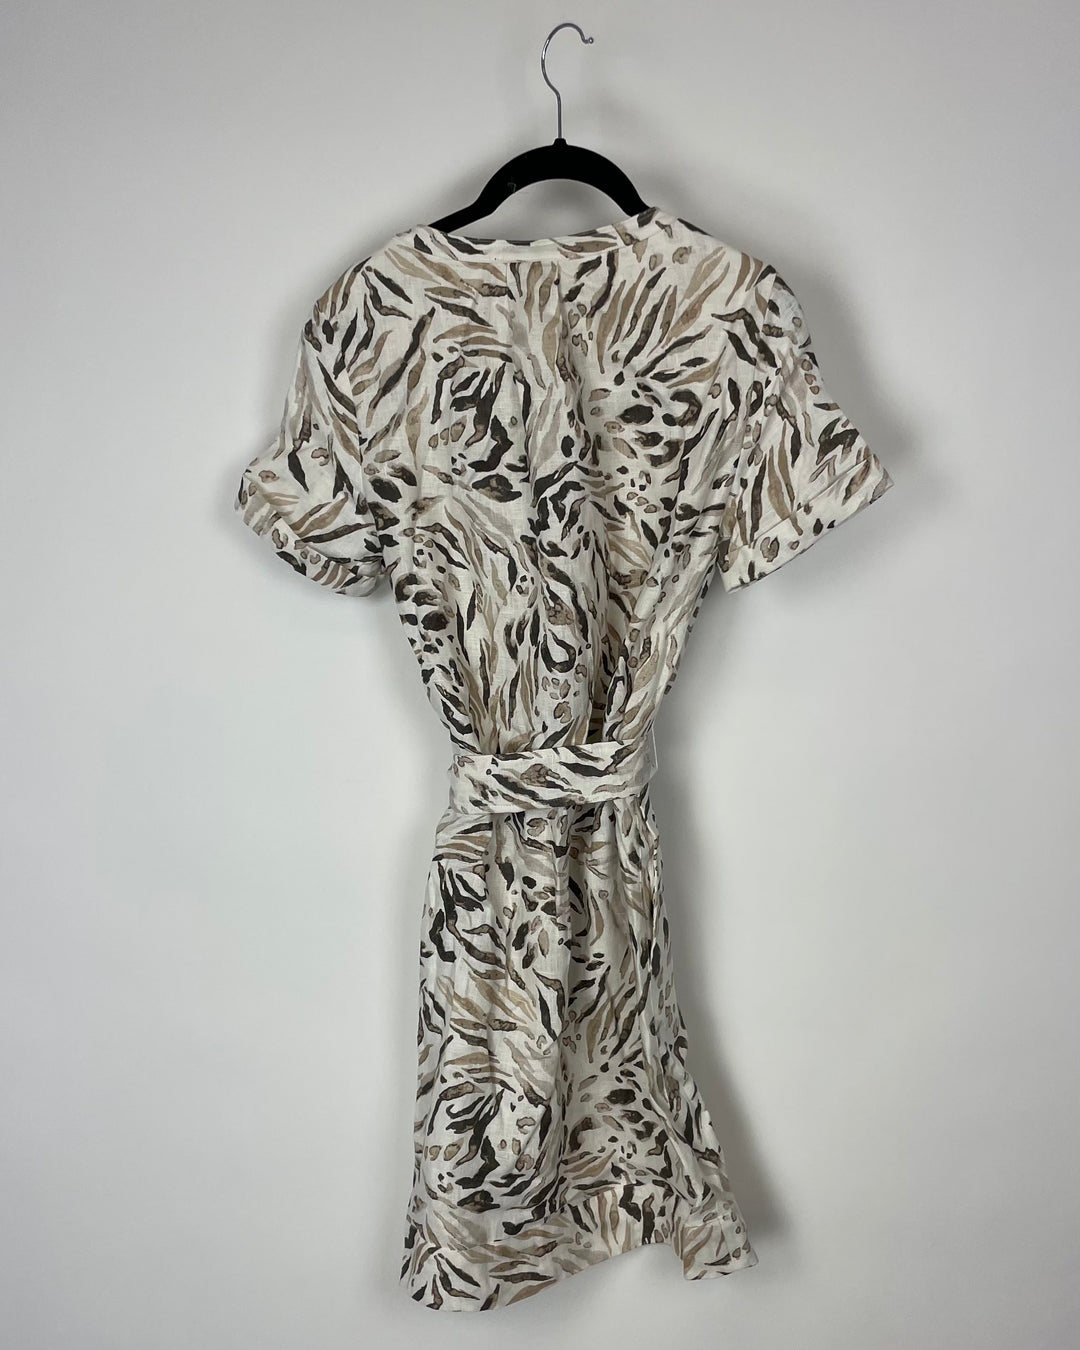 White And Brown Abstract Design Dress - Size 2